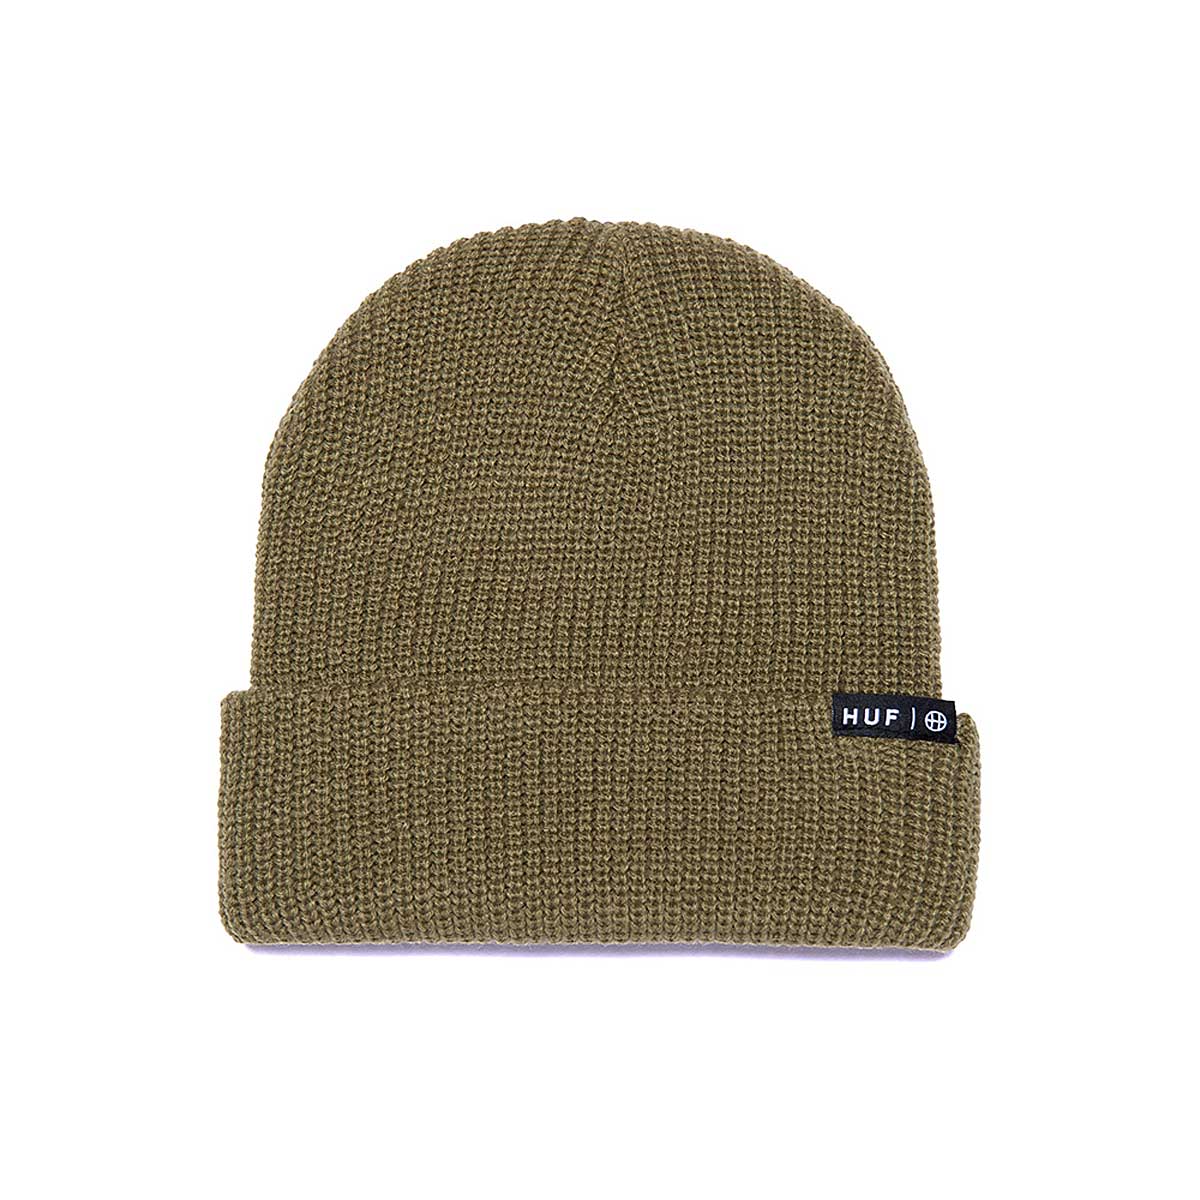 Huf Essentials Usual Beanie, Olive